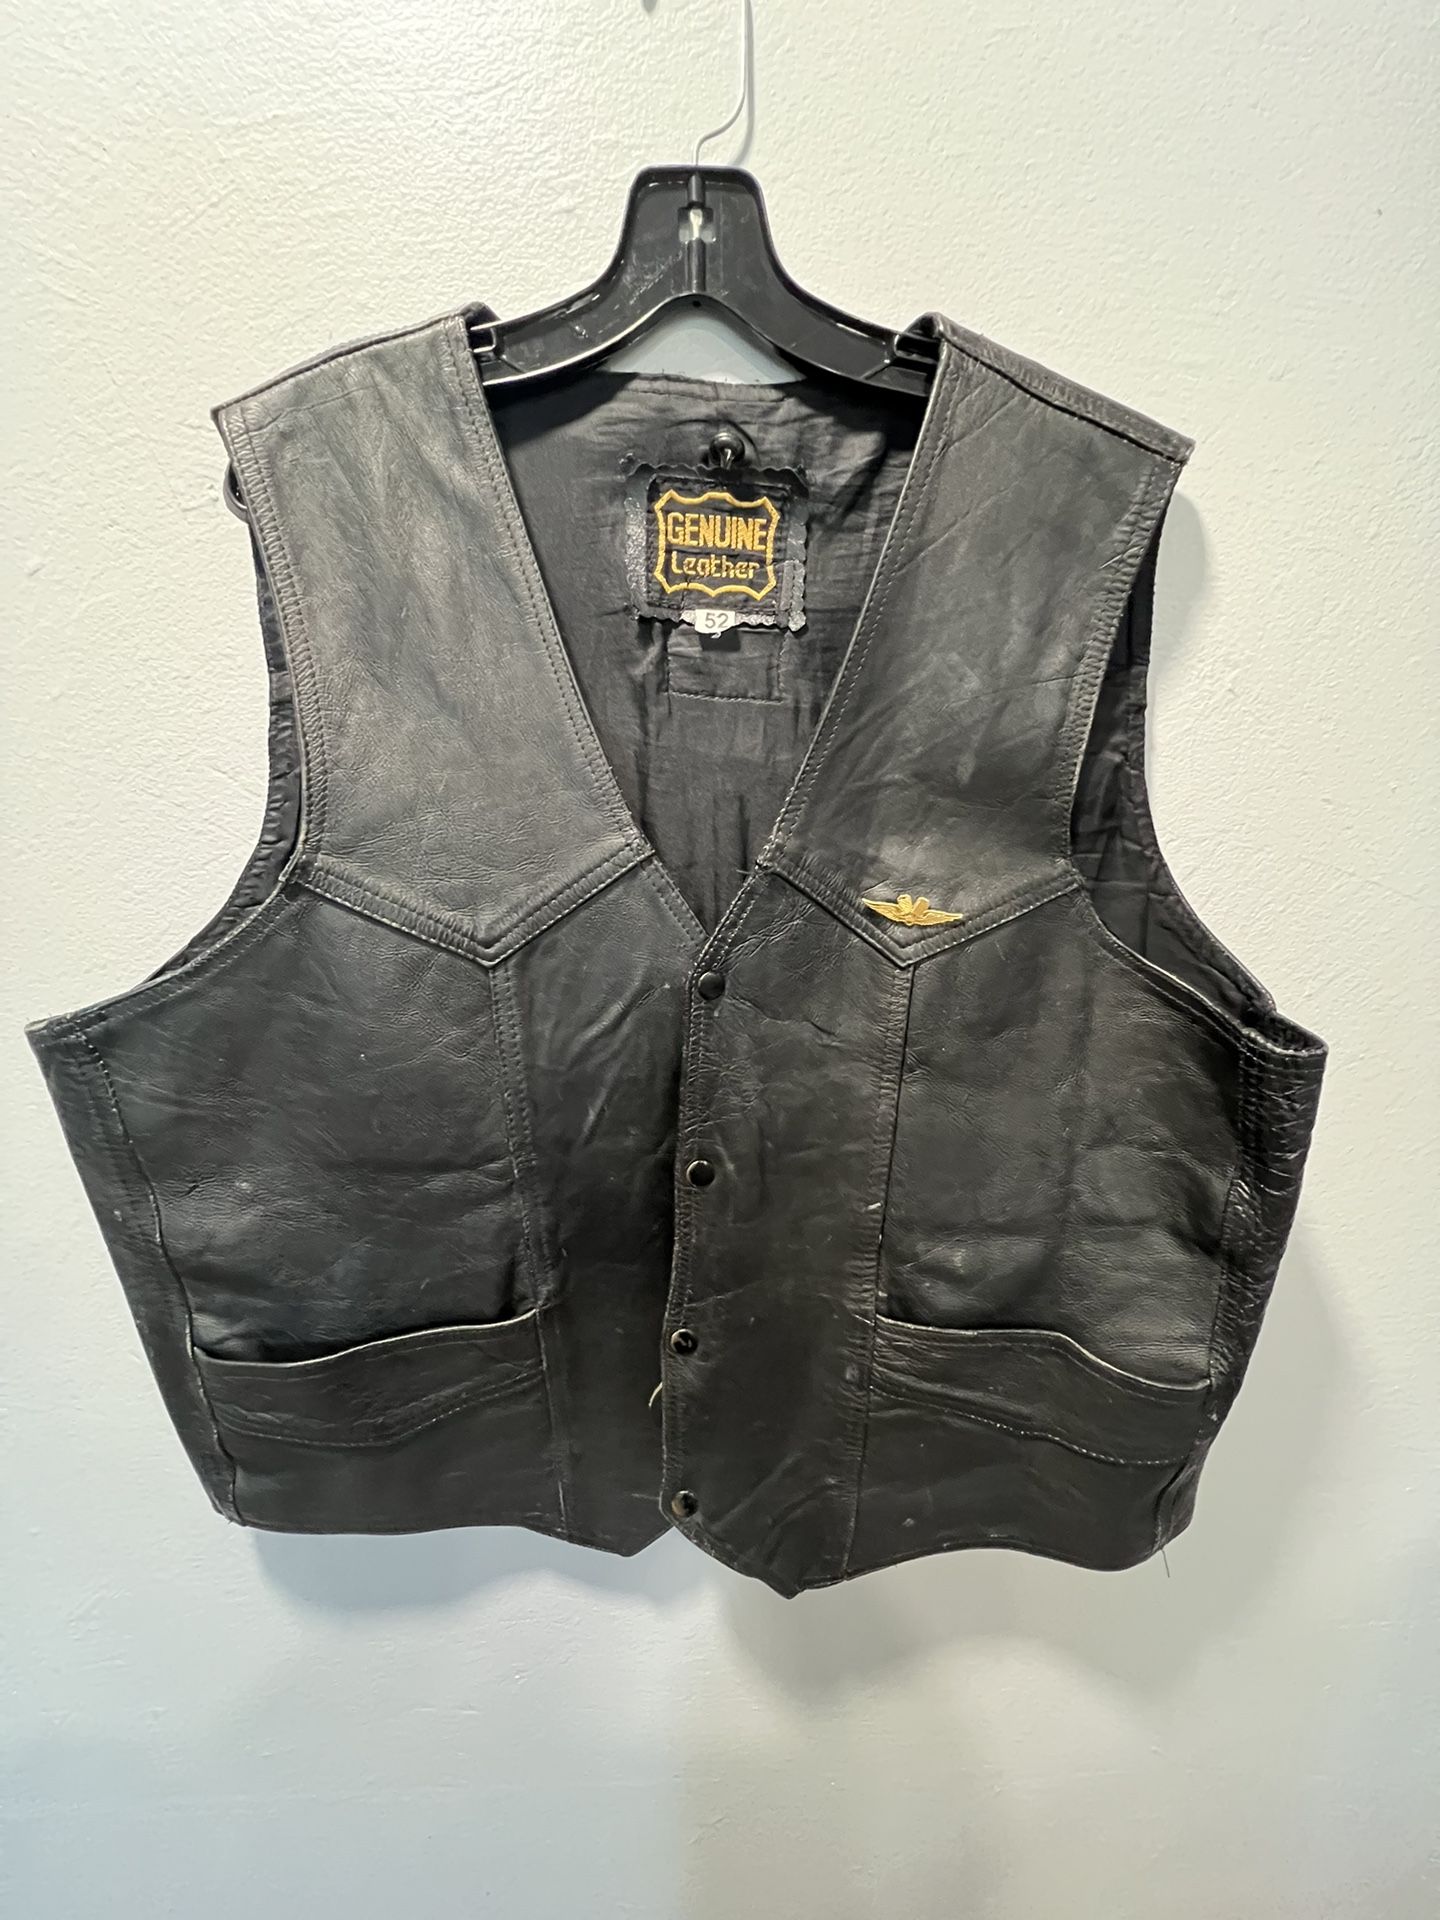 Genuine Leather Motorcycle Riding Vest